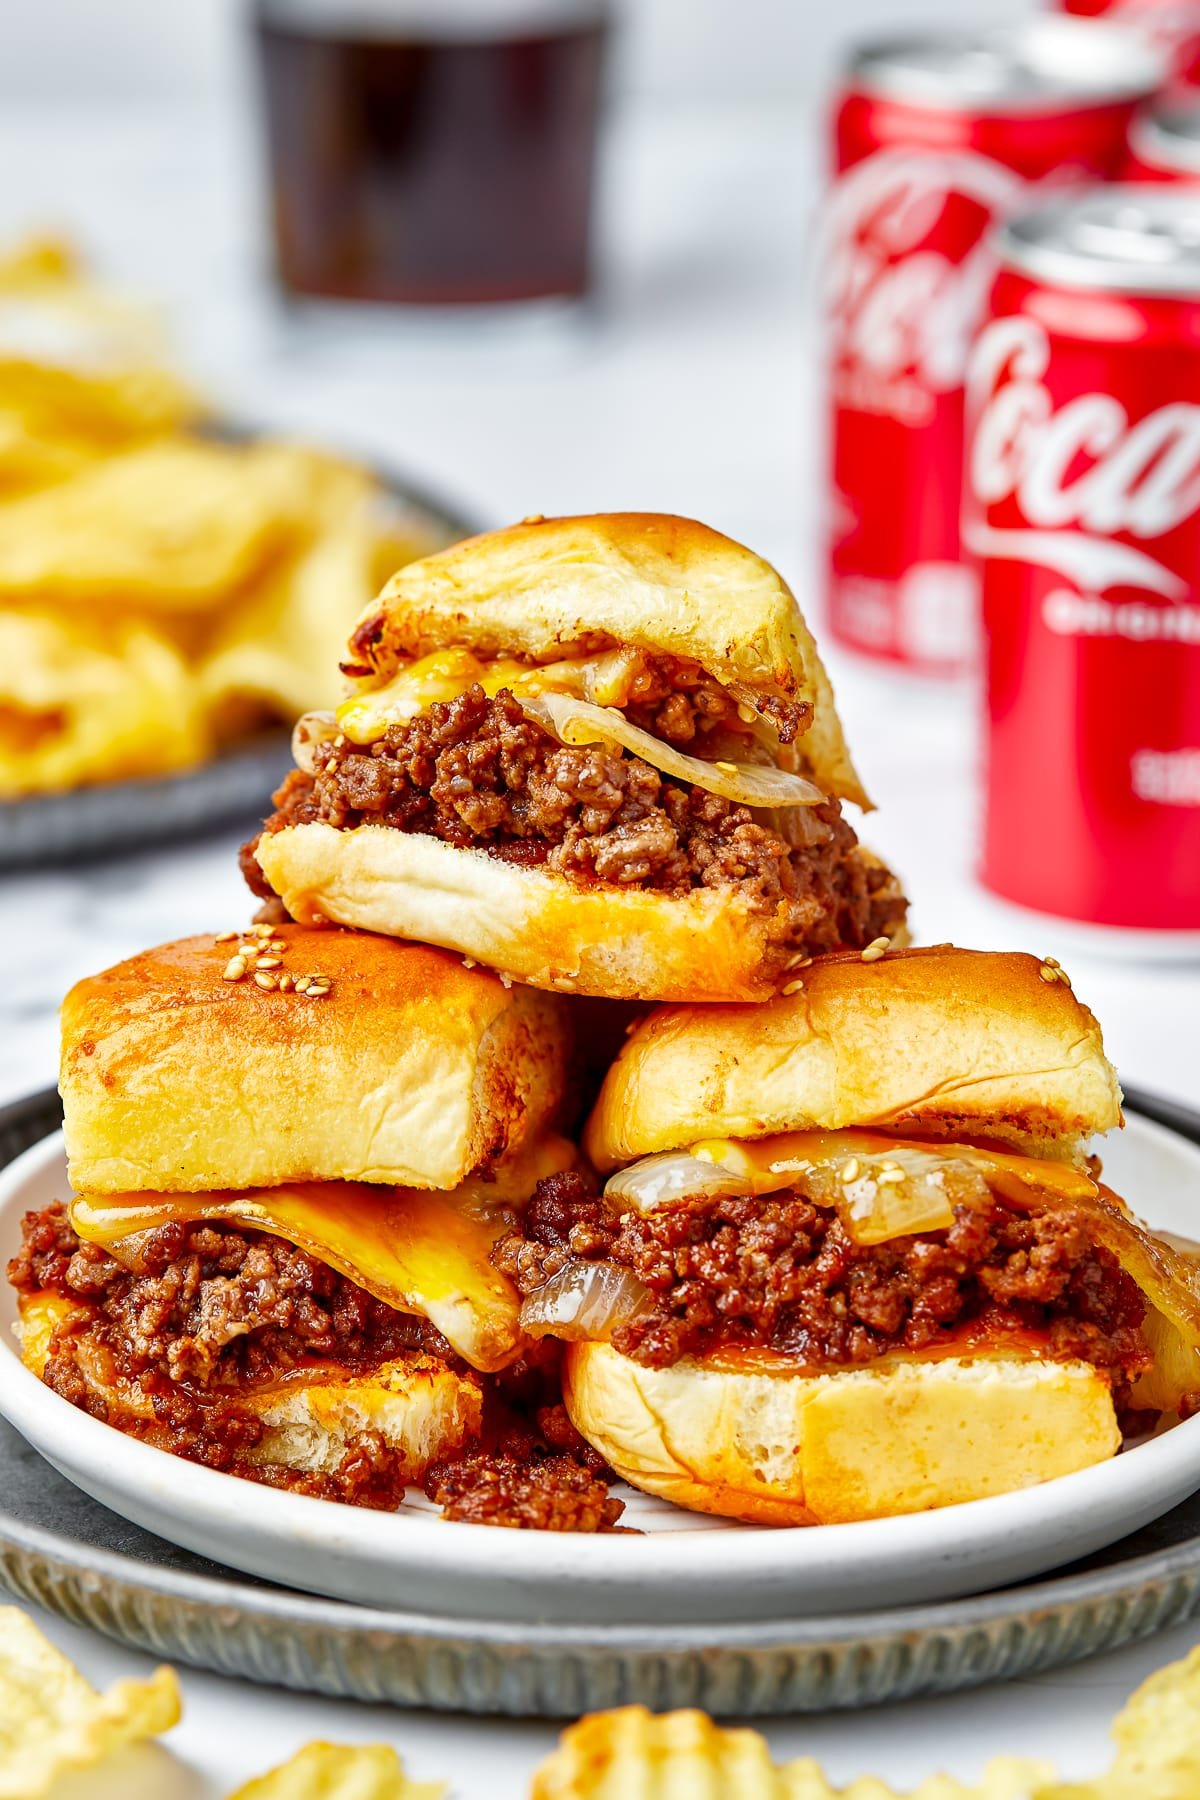 Sloppy Joe Sliders stacked on a white plate that is sitting on a metal serving platter, wavy chips and cans of coca-cola in the background